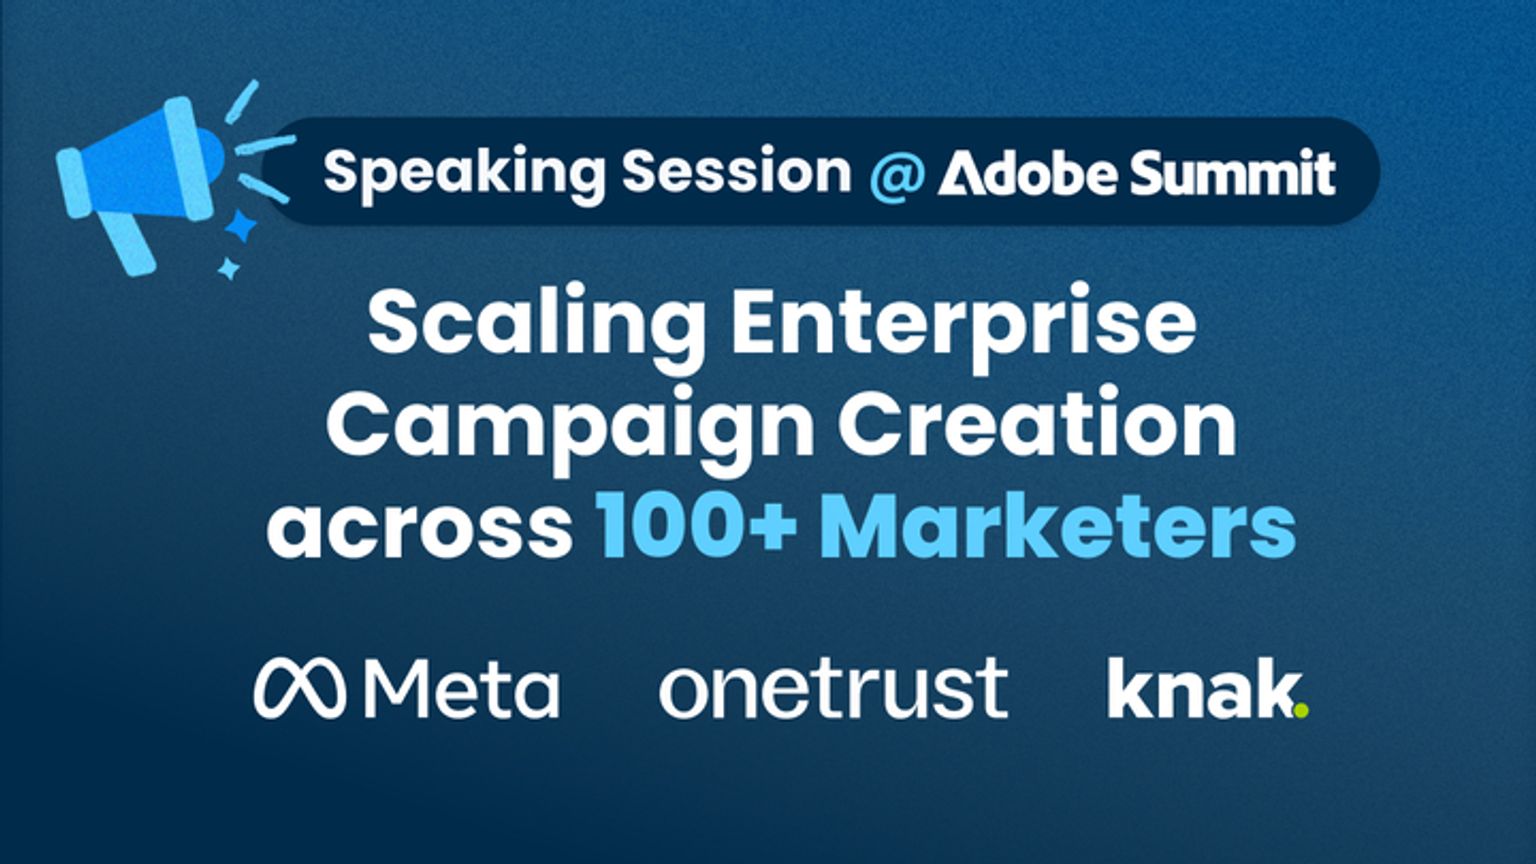 Scaling Enterprise Campaign Creation across 100+ Marketers